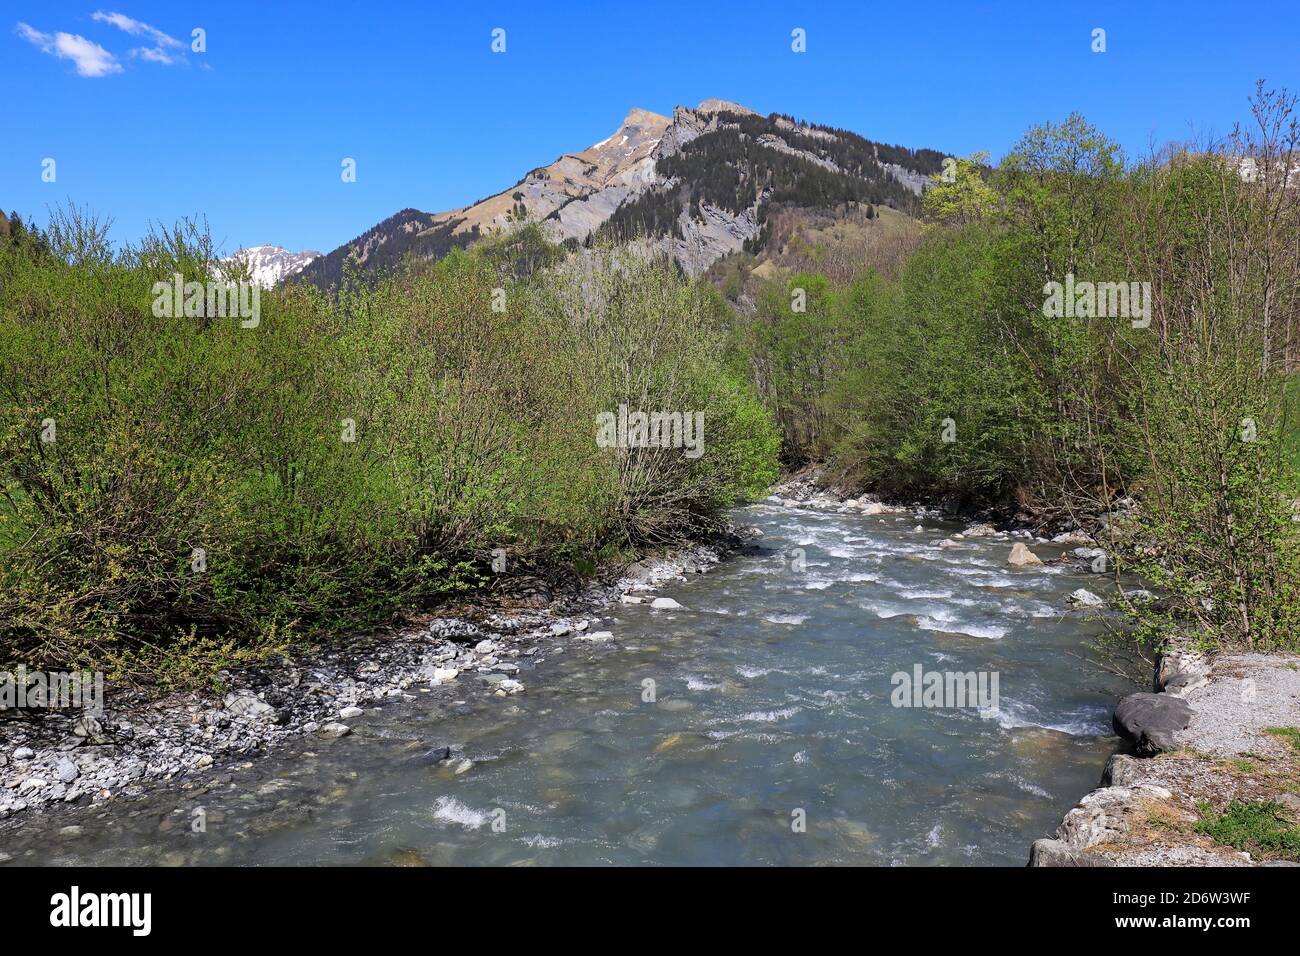 Sernf river with clear fresh water close to the village of Elm, Glarus, Switzerland Stock Photo